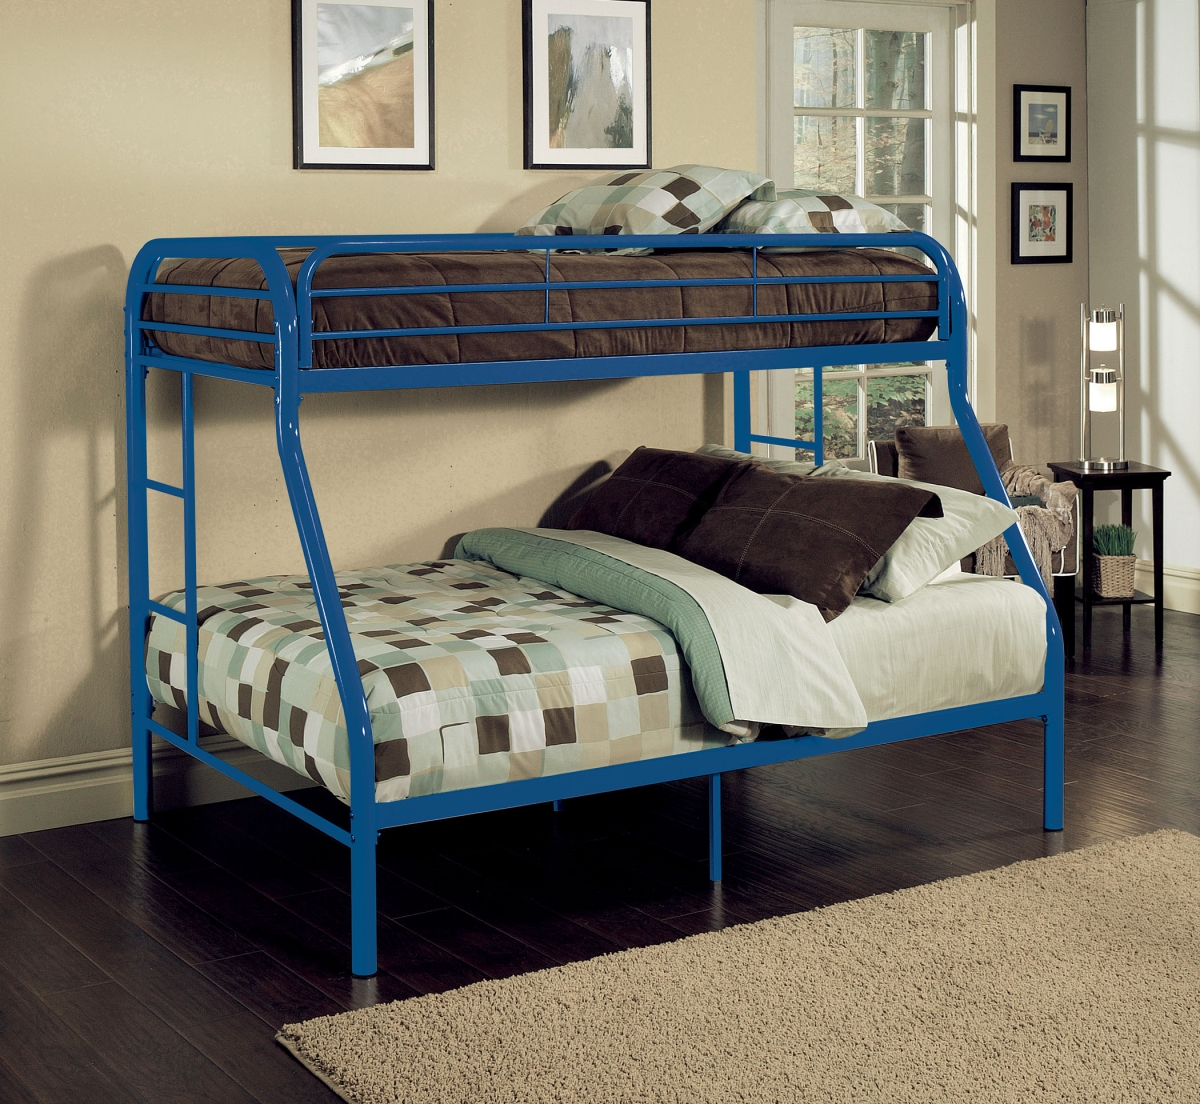 Picture of Home Roots Furniture 286574 60 x 78 x 54 in. Metal Tube Twin Full Bunk Bed - Blue